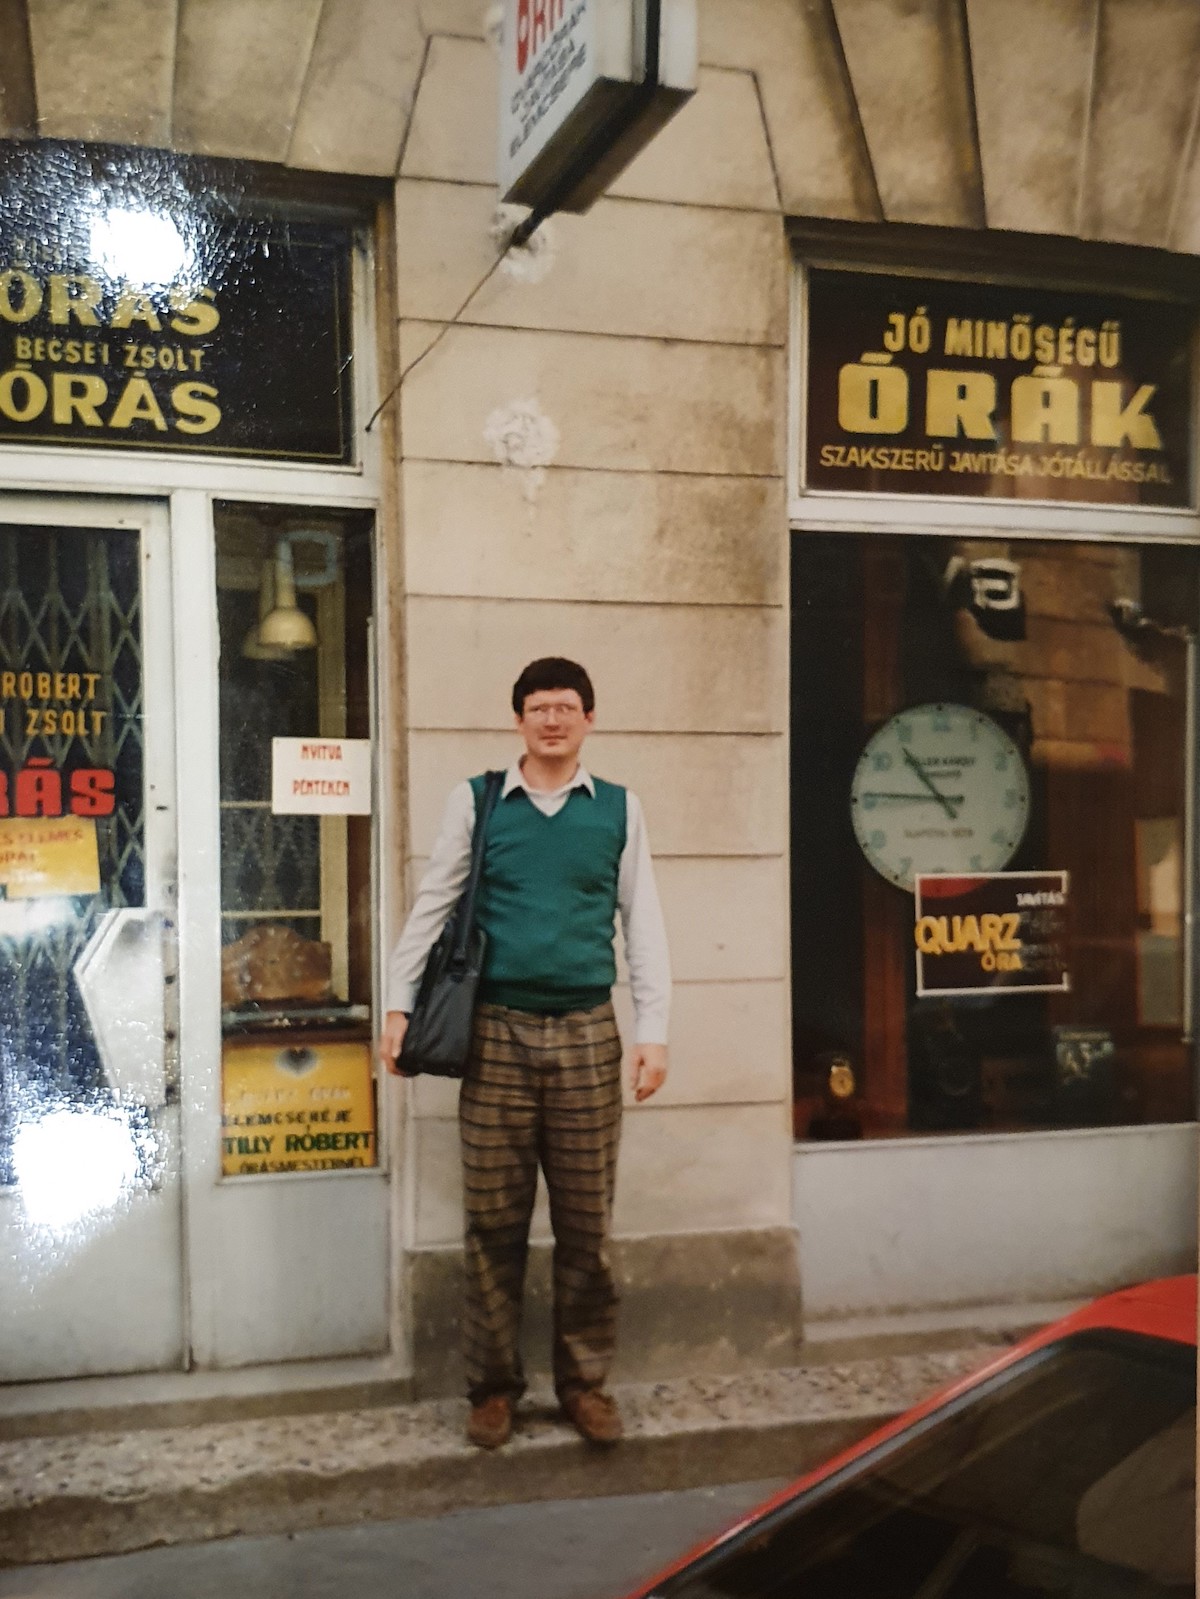 Aaron Becsei's father in front of his shop